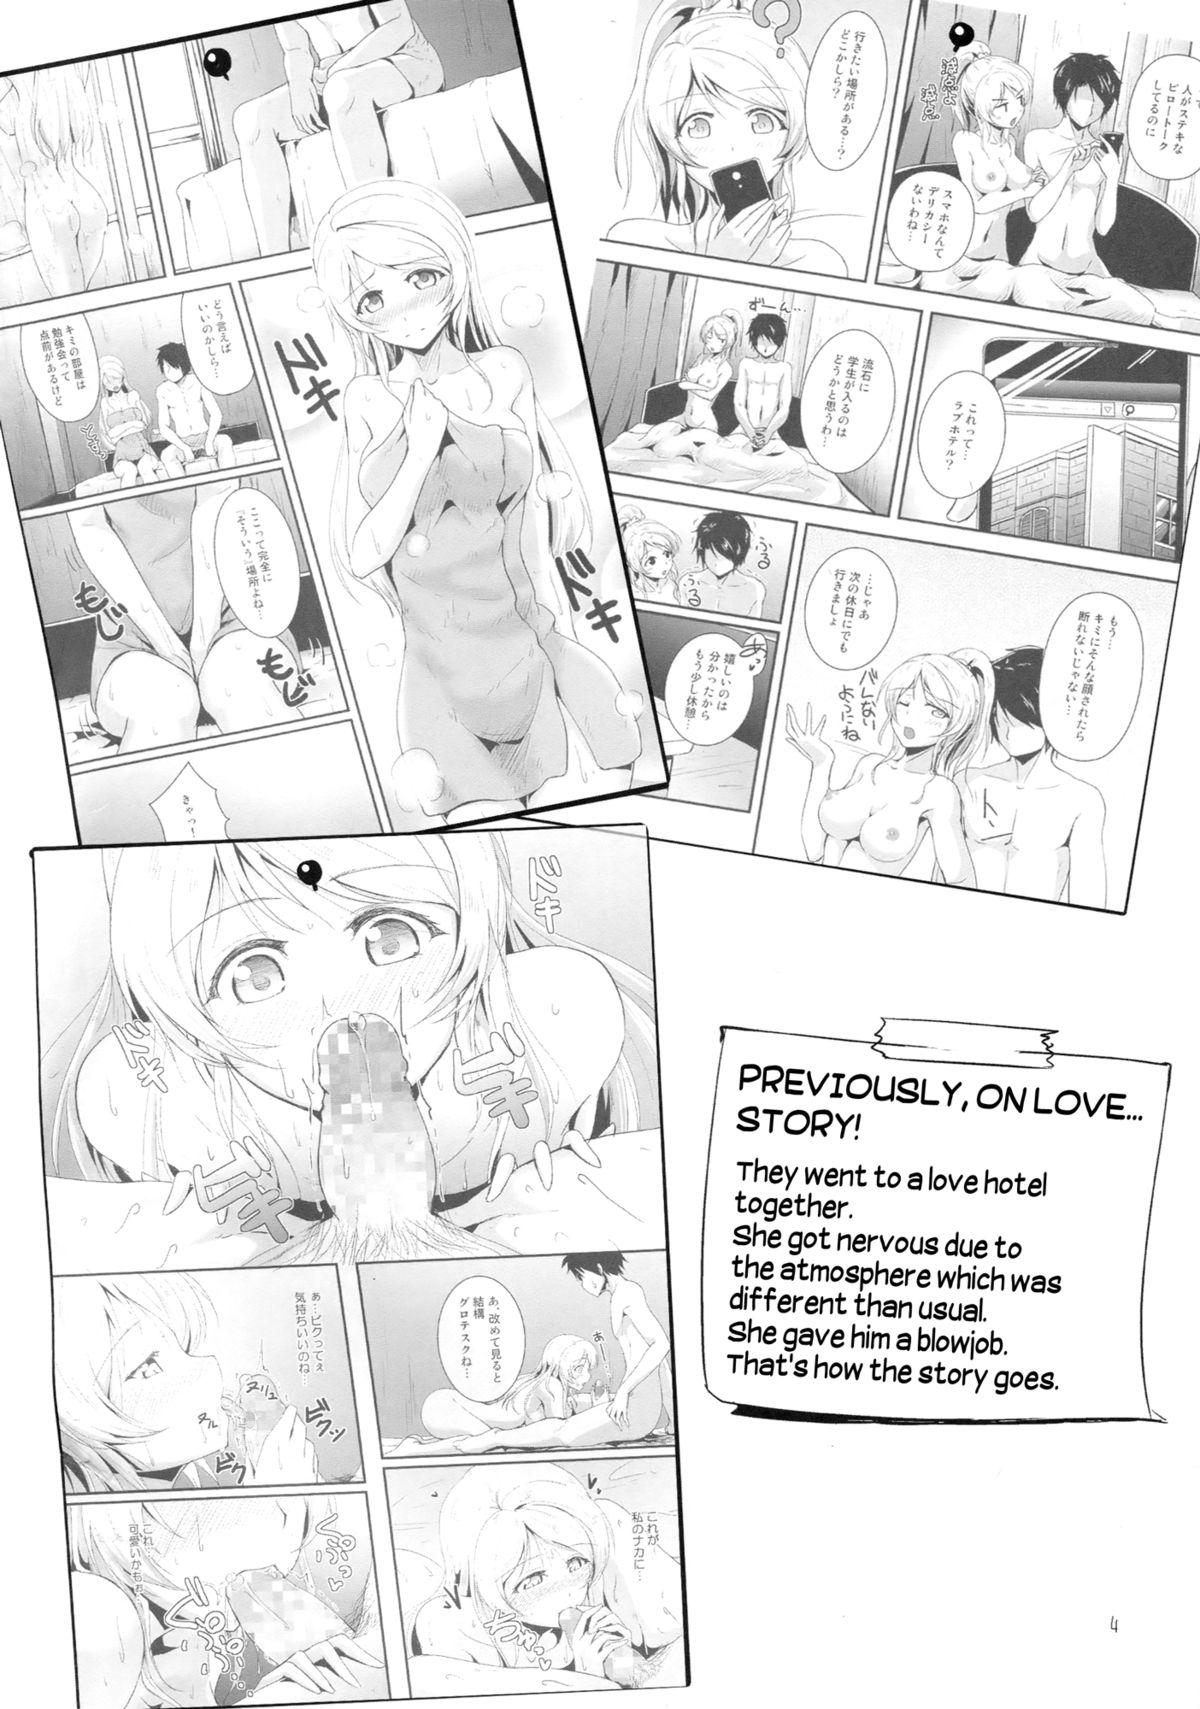 Special Locations Let's Study xxx 3 - Love live Kink - Page 3